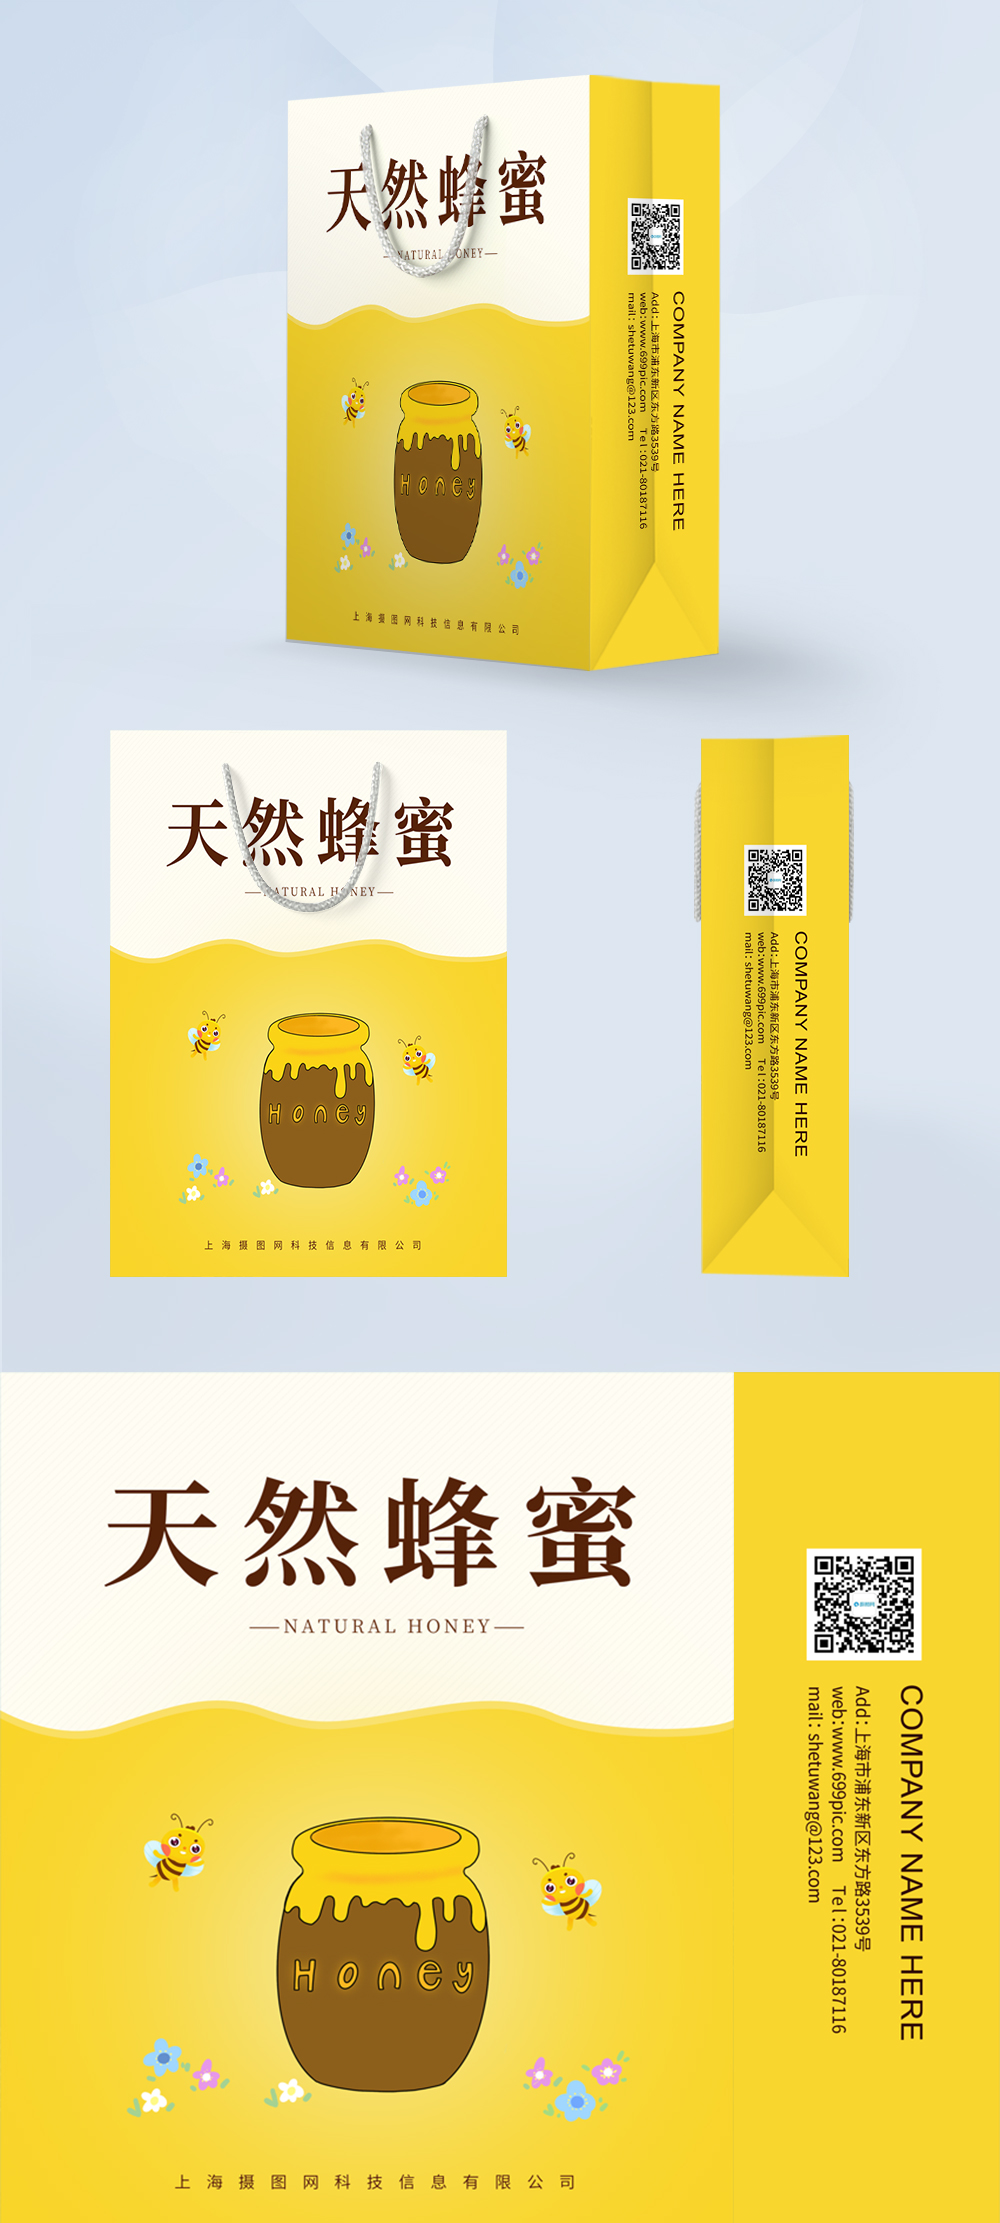 Download Yellow Small Fresh Honey Packaging Tote Template Image Picture Free Download 401682664 Lovepik Com Yellowimages Mockups